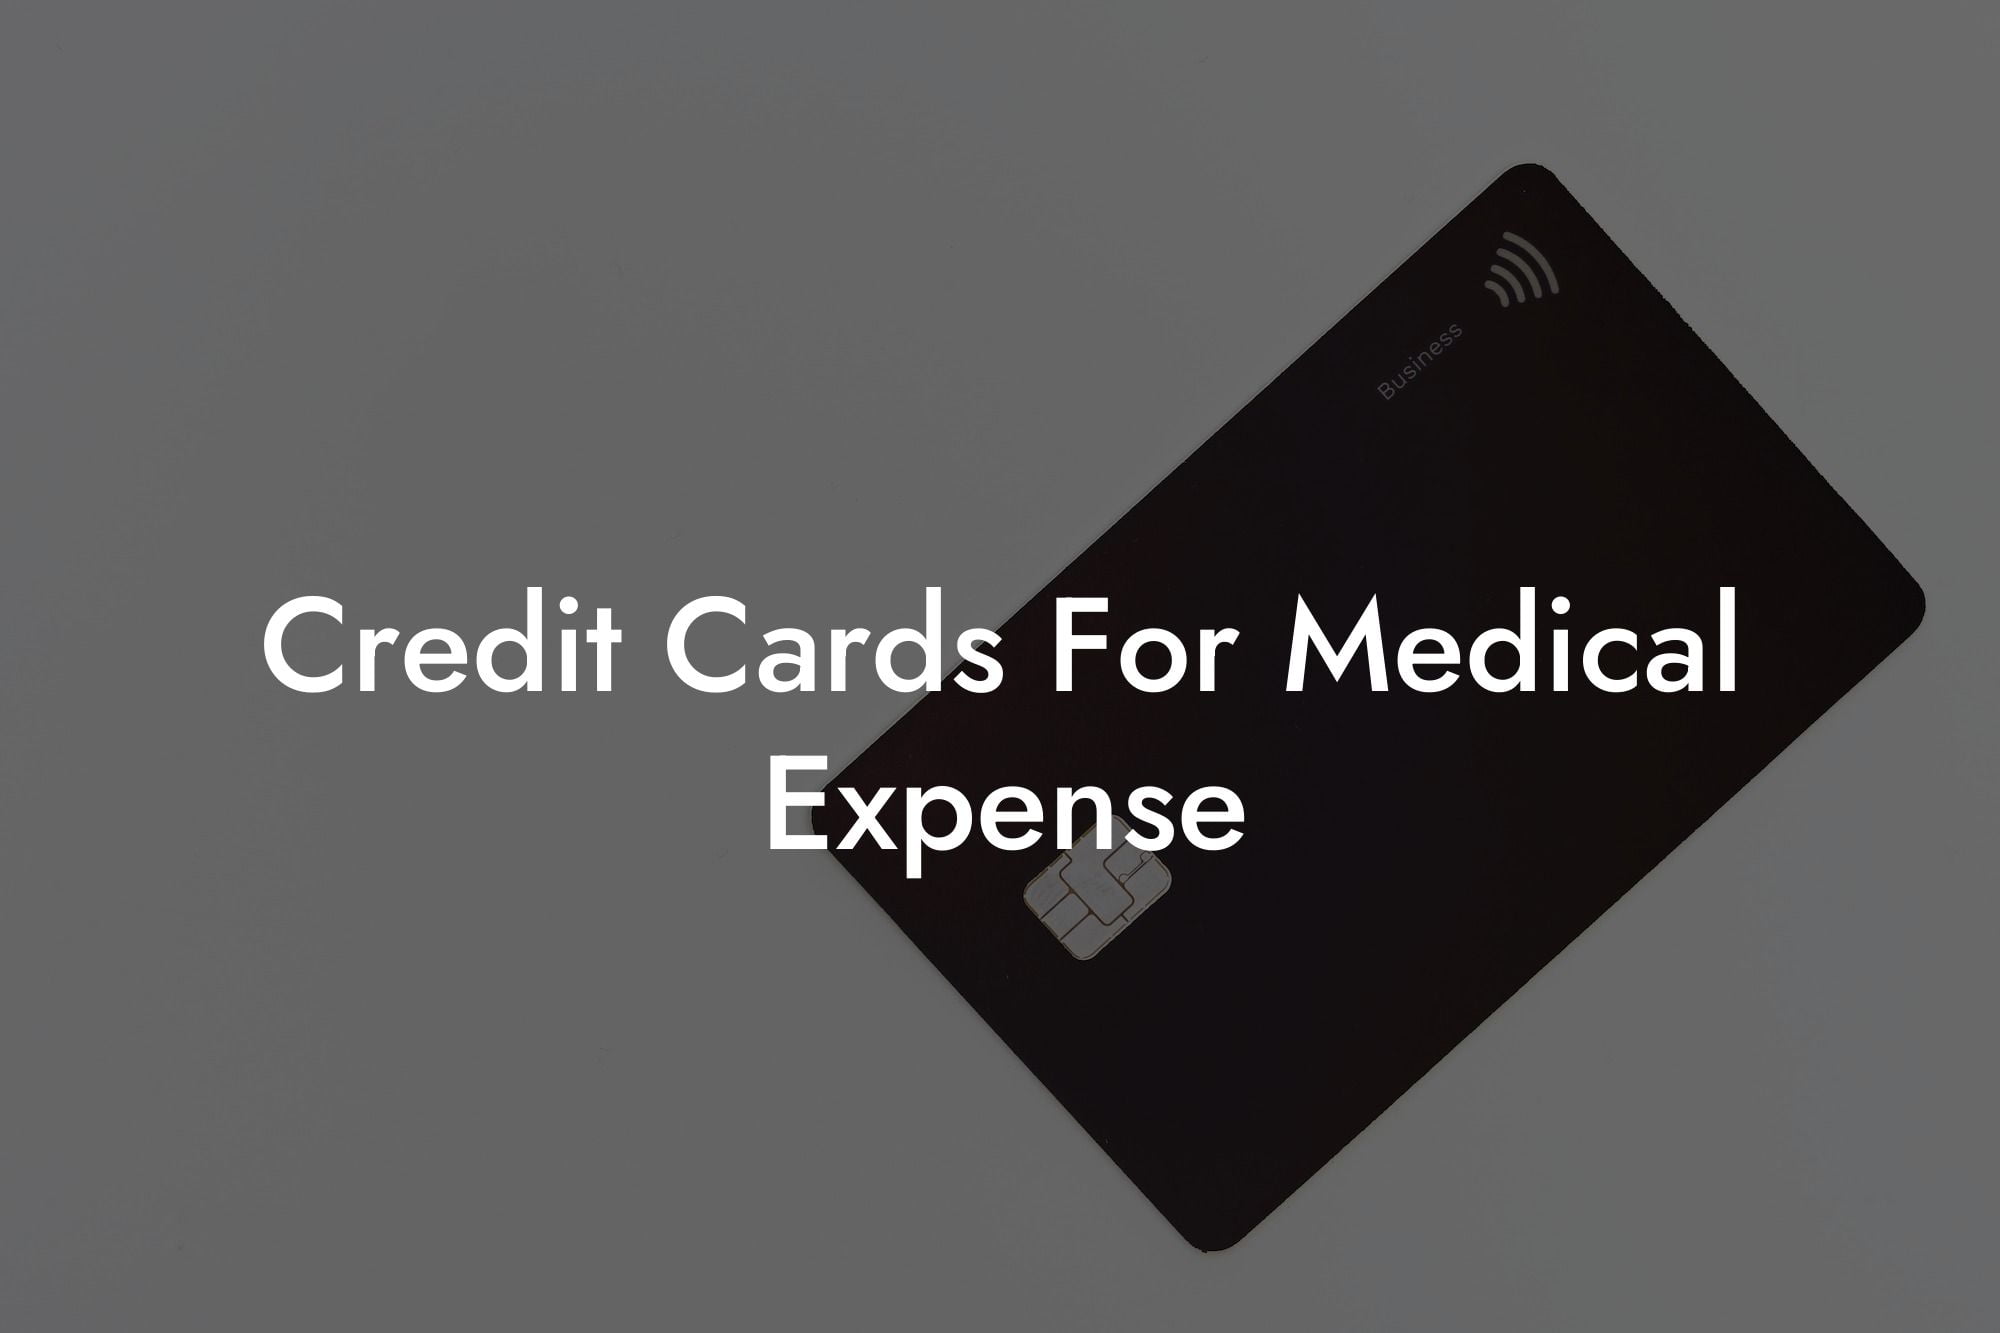 Credit Cards For Medical Expense